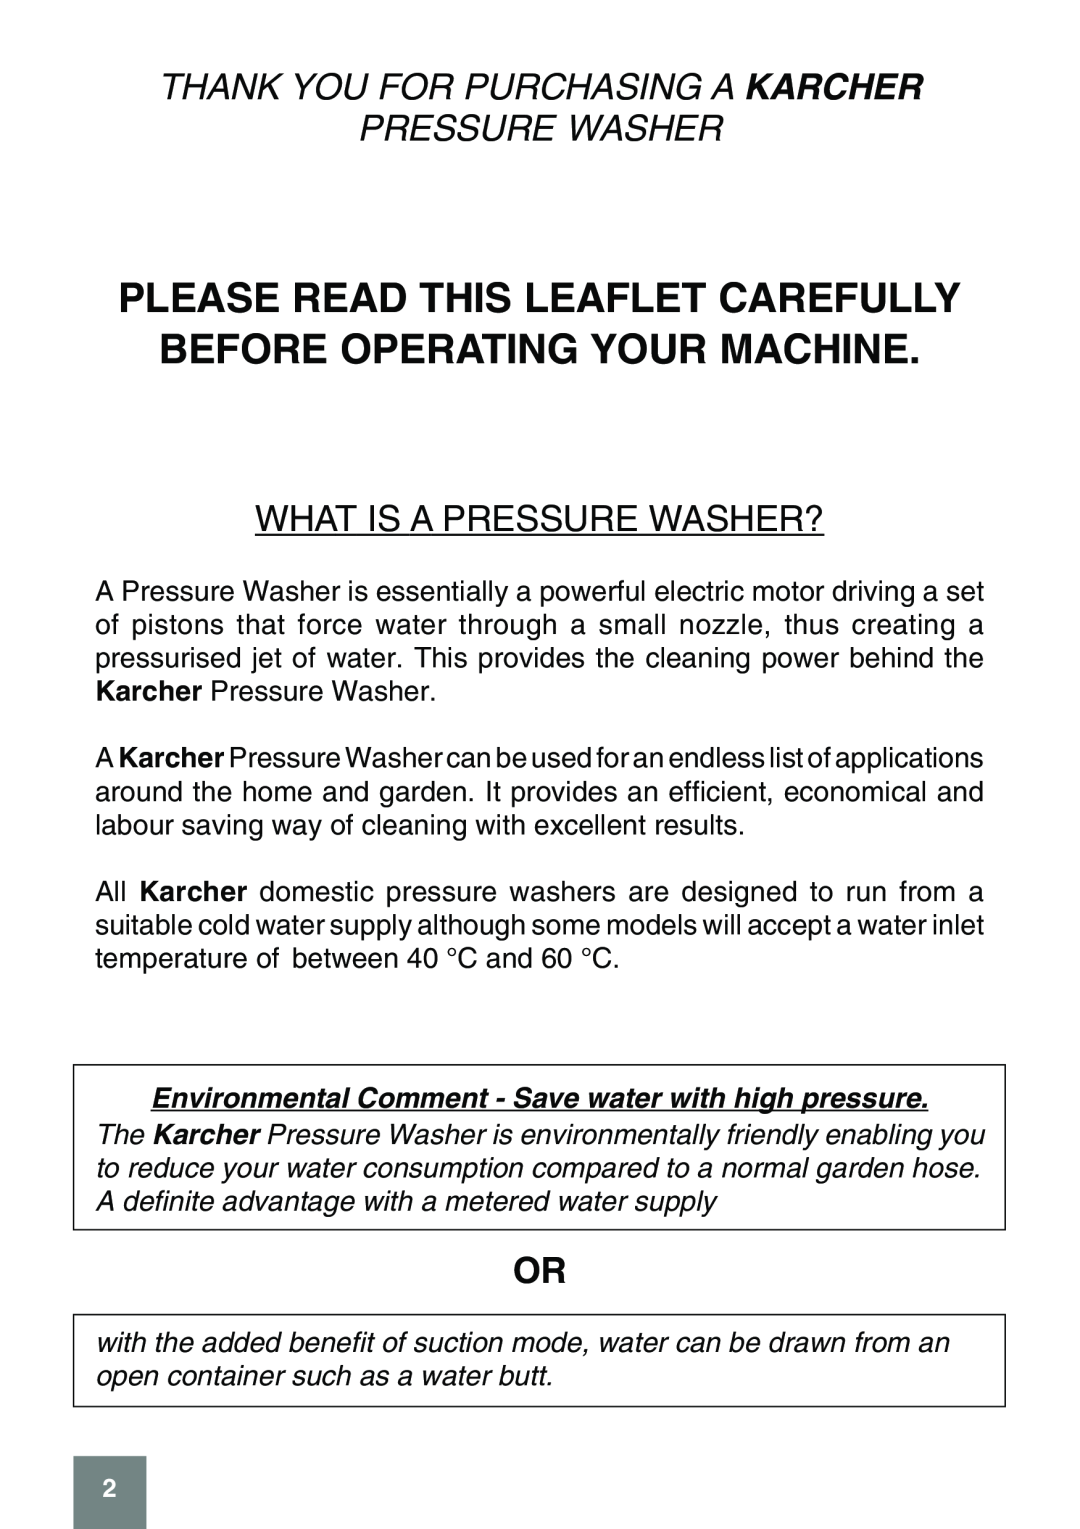 Karcher darcher, 397 m plus Please Read This Leaflet Carefully Before Operating Your Machine, What Is A Pressure Washer? 